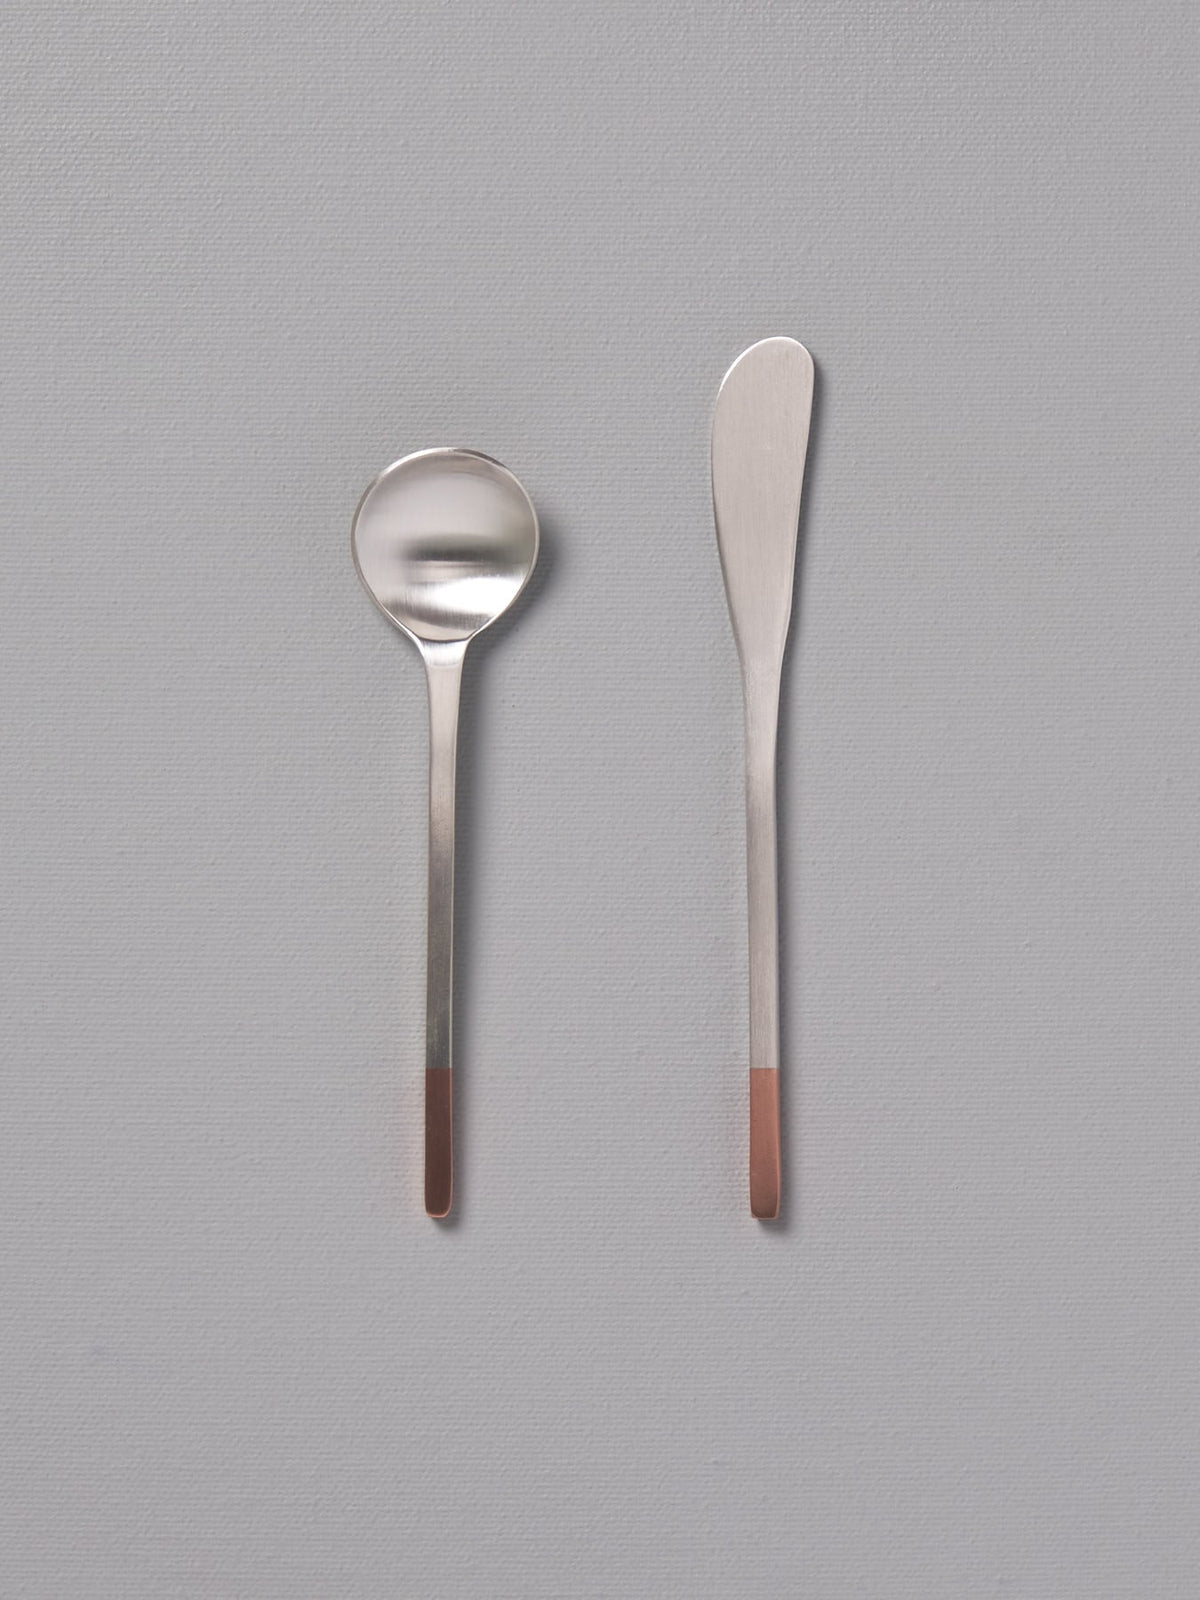 Two Copper and Stainless Steel Teaspoons by Kobo Aizawa on a grey surface.